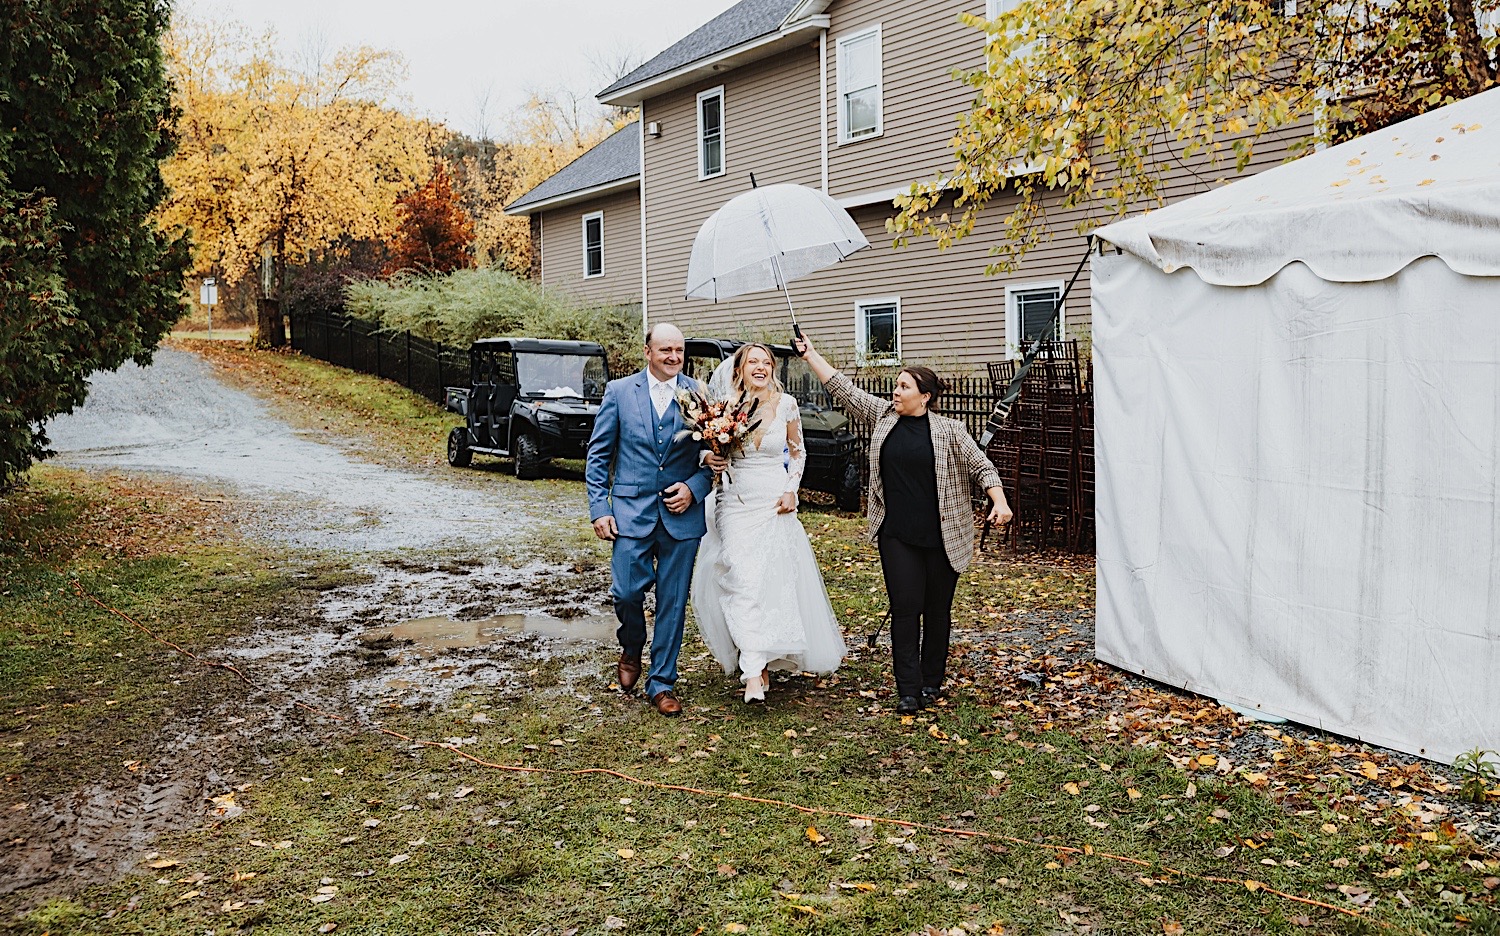 A bride laughs while walking towards the ceremony space for her wedding at Lake Bomoseen Lodge in Vermont, she is escorted by her father and a woman is holding an umbrella over the bride's head